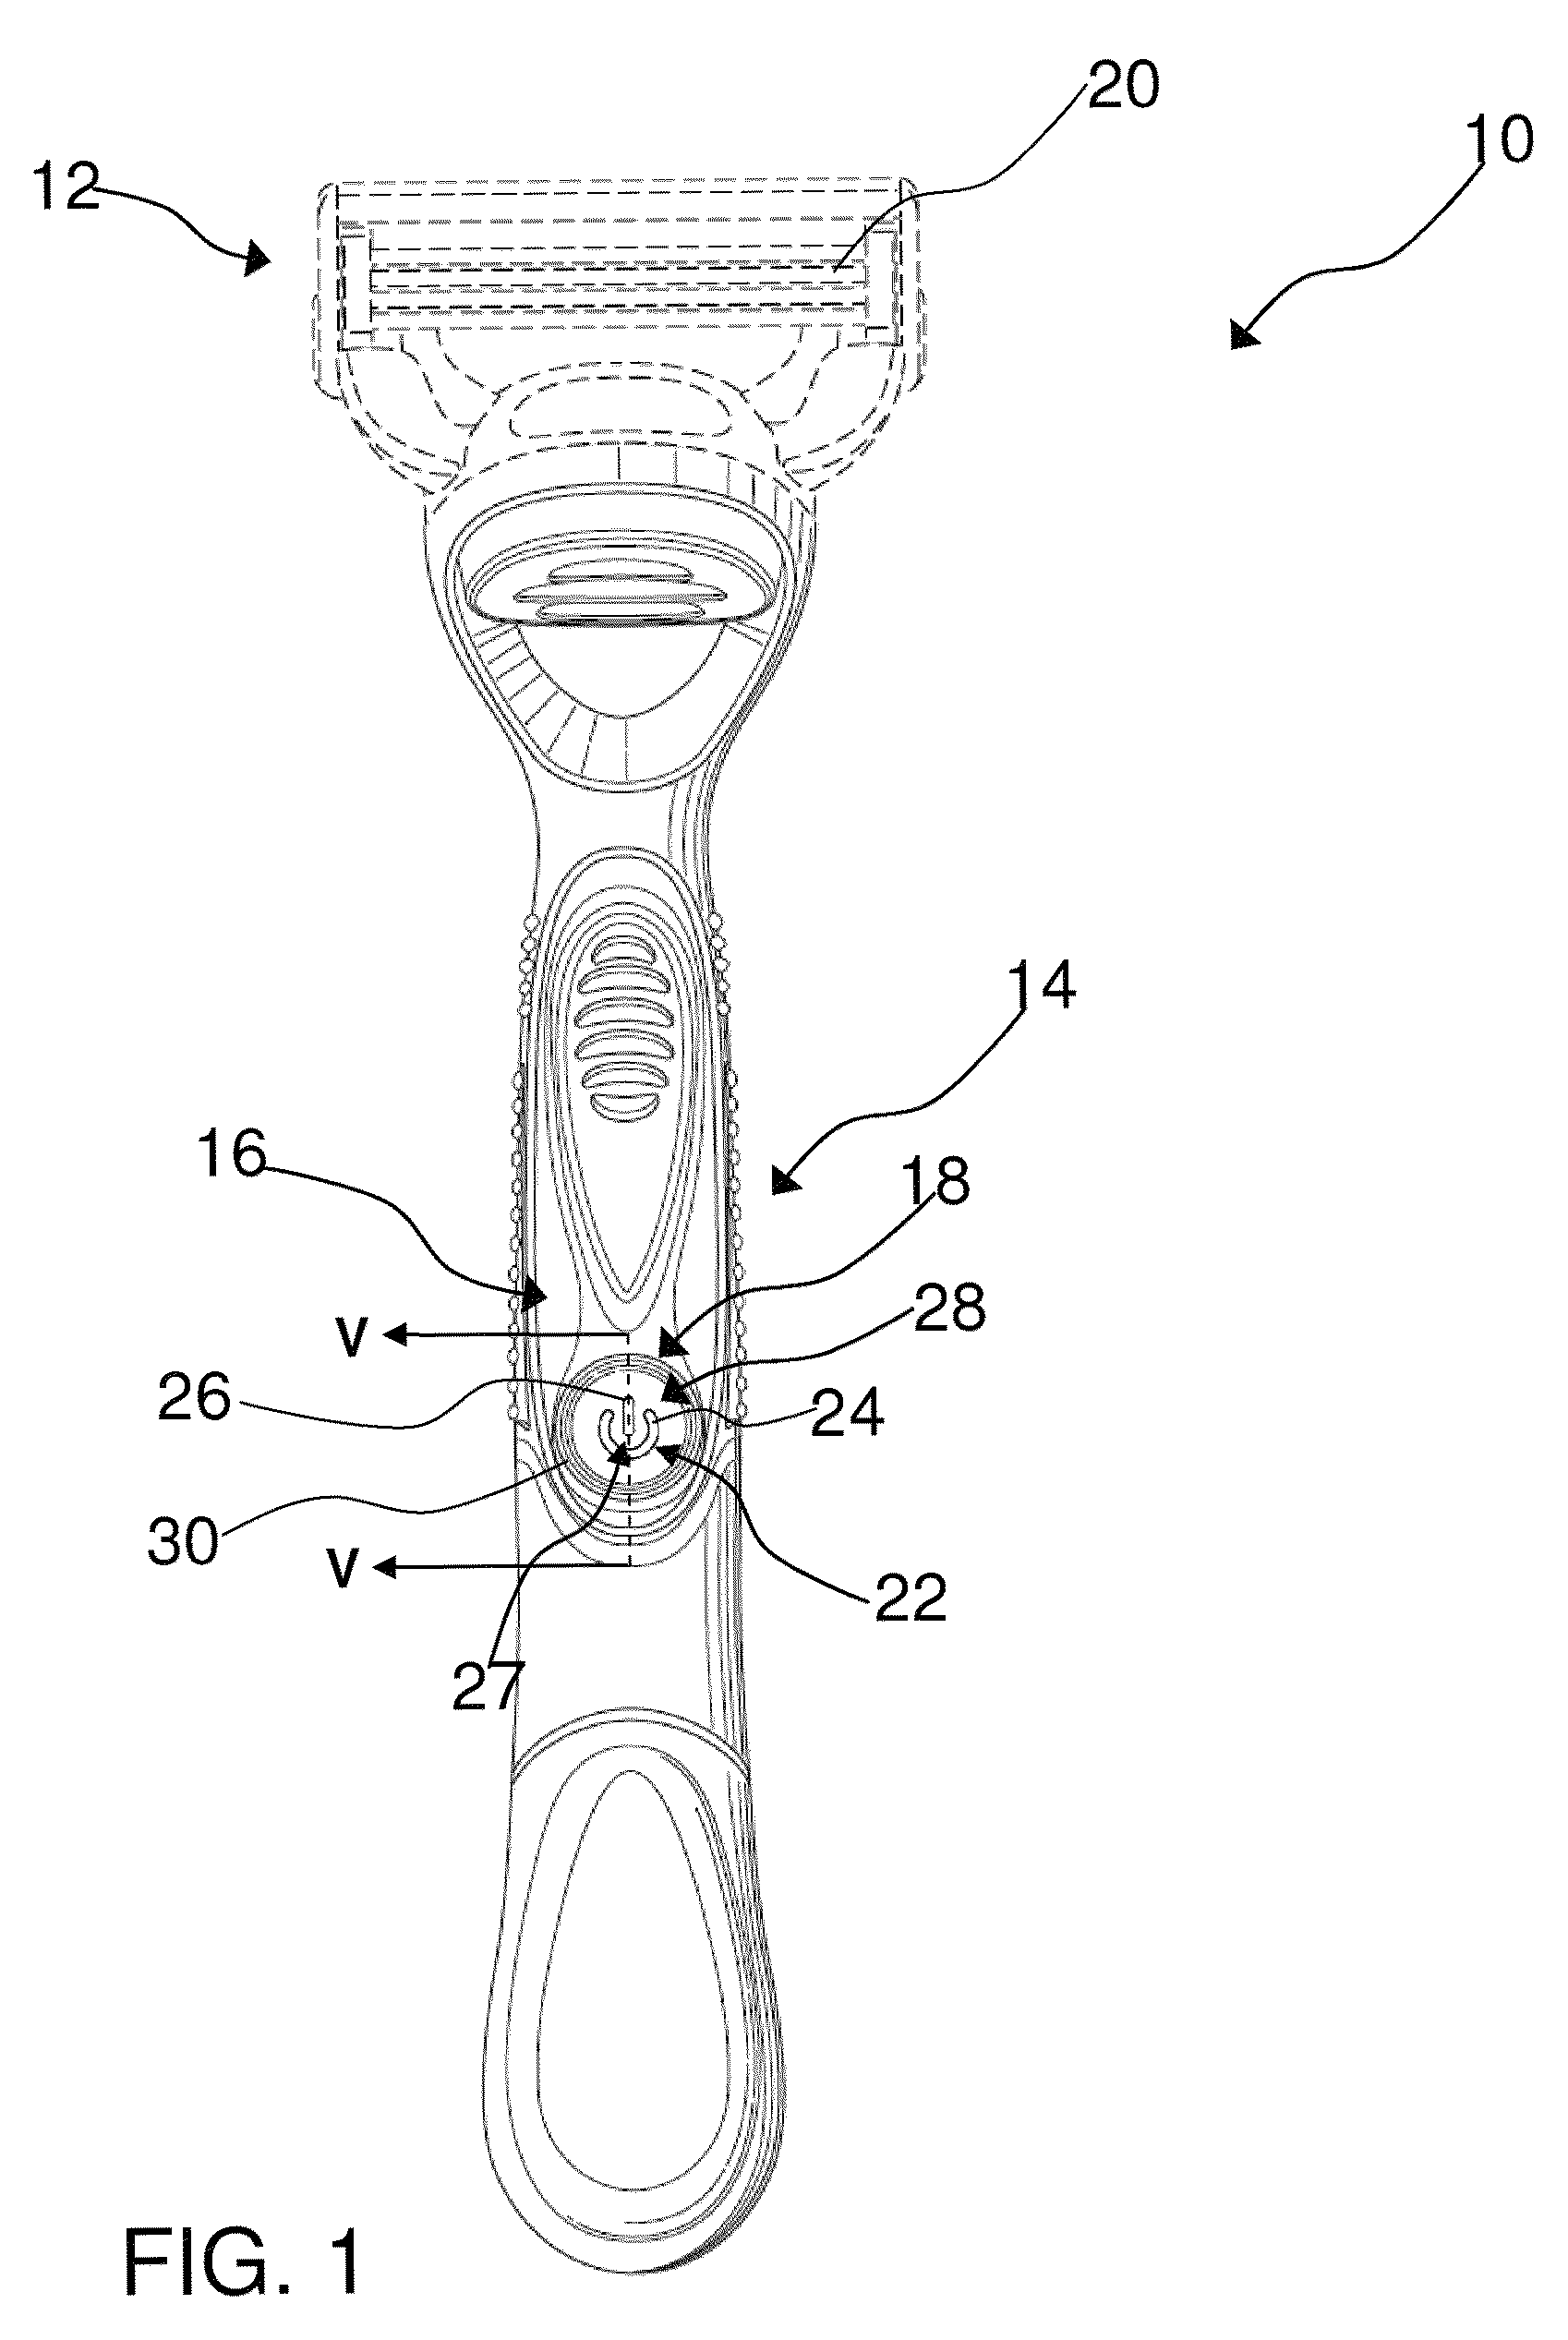 Device with an illuminated button assembly